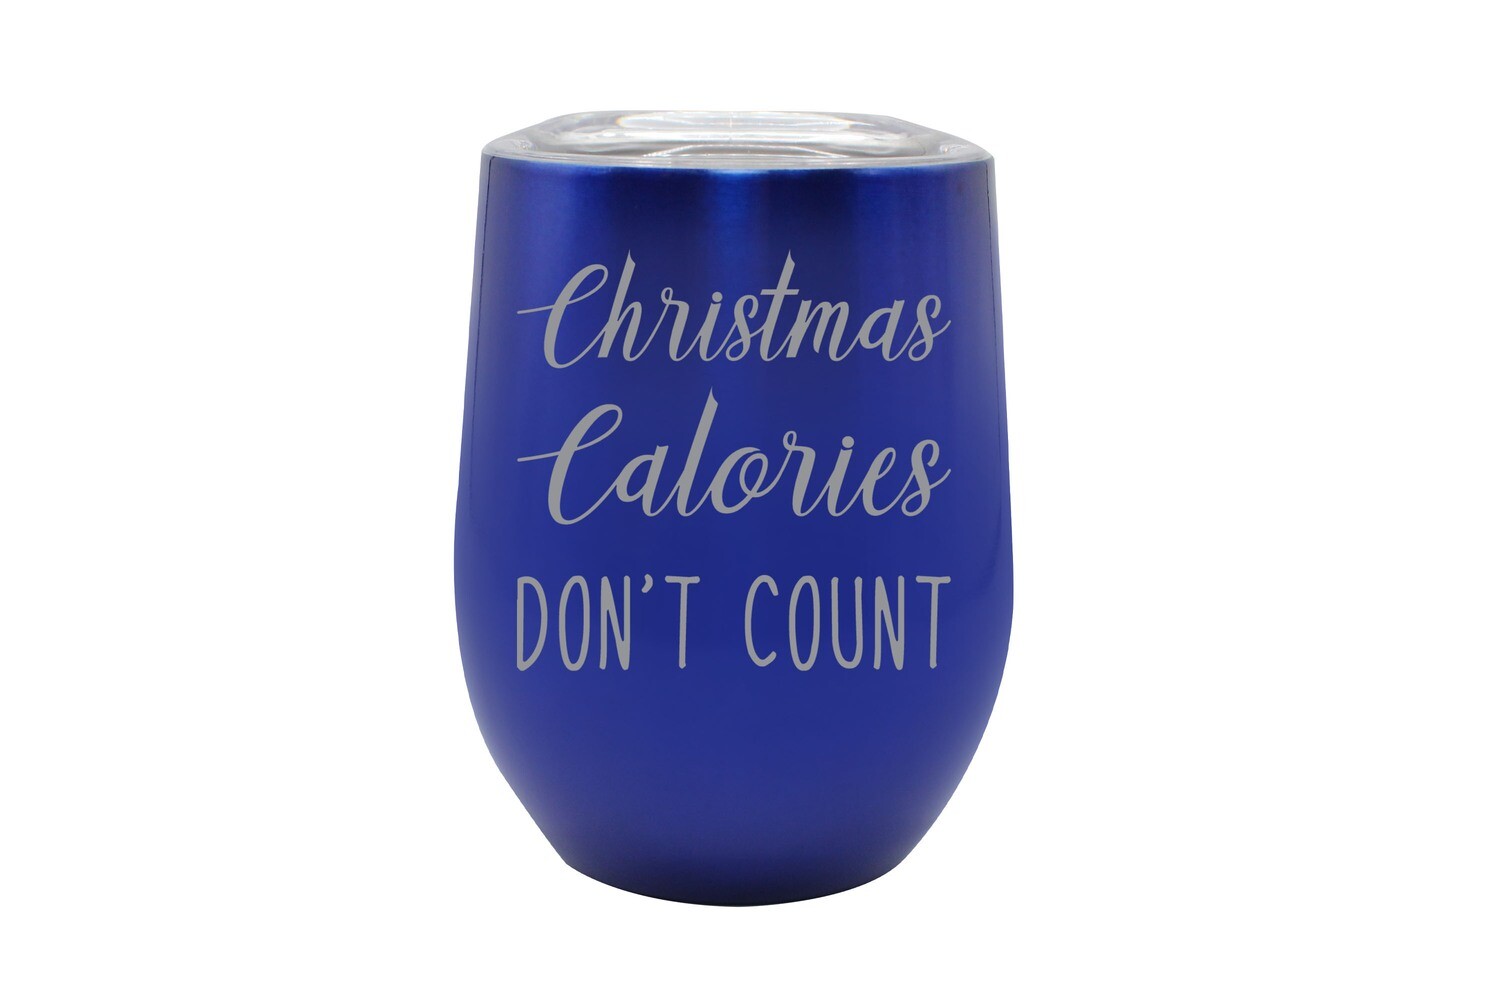 Christmas Calories Don't Count Insulated Tumbler 12 oz